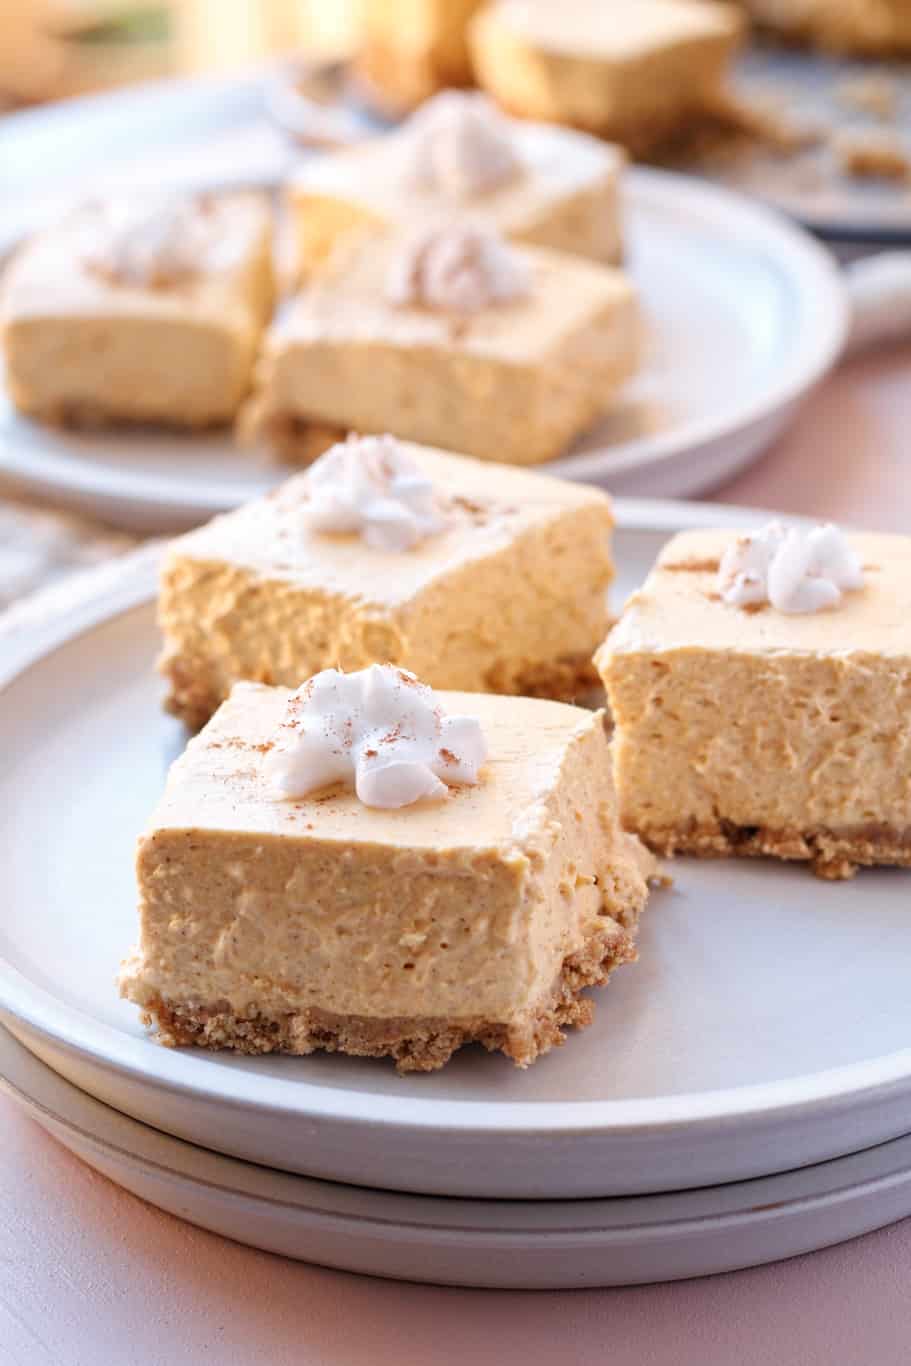 Serve chilled no-bake pumpkin bars with whipped cream before serving and a sprinkle of cinnamon on the top.